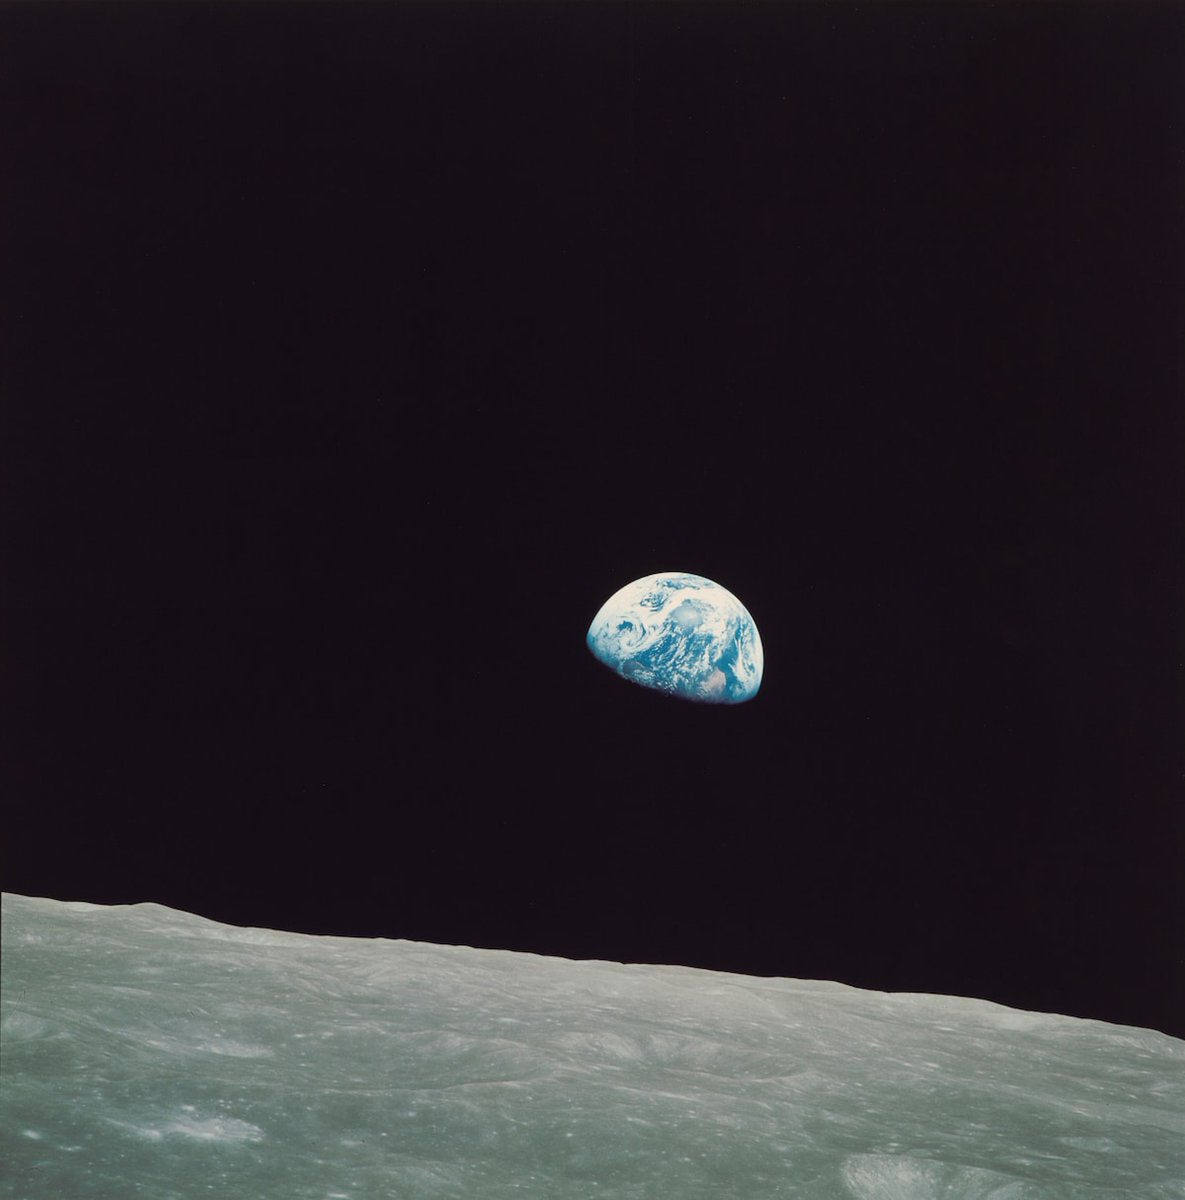 Earthrise. 
Picture taken by Bill Anders on board Apollo 8.